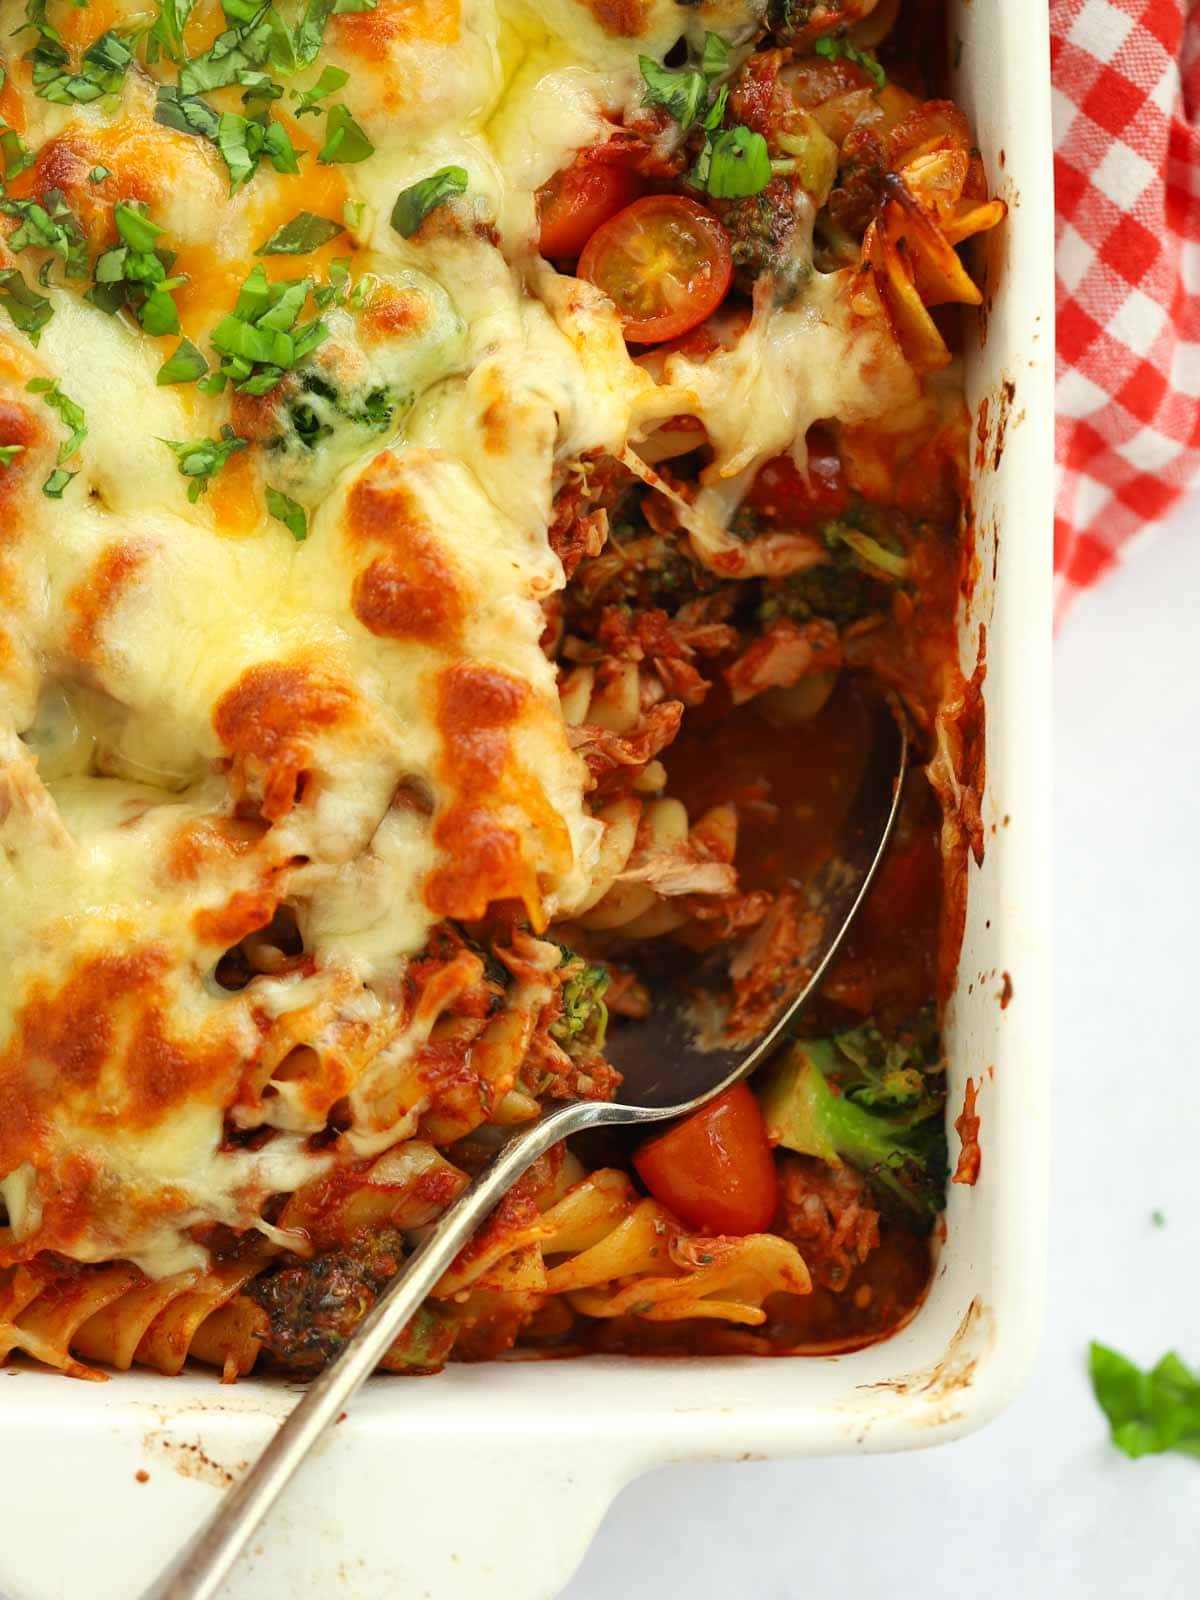 This is the easiest every Tuna Pasta Bake Recipe!